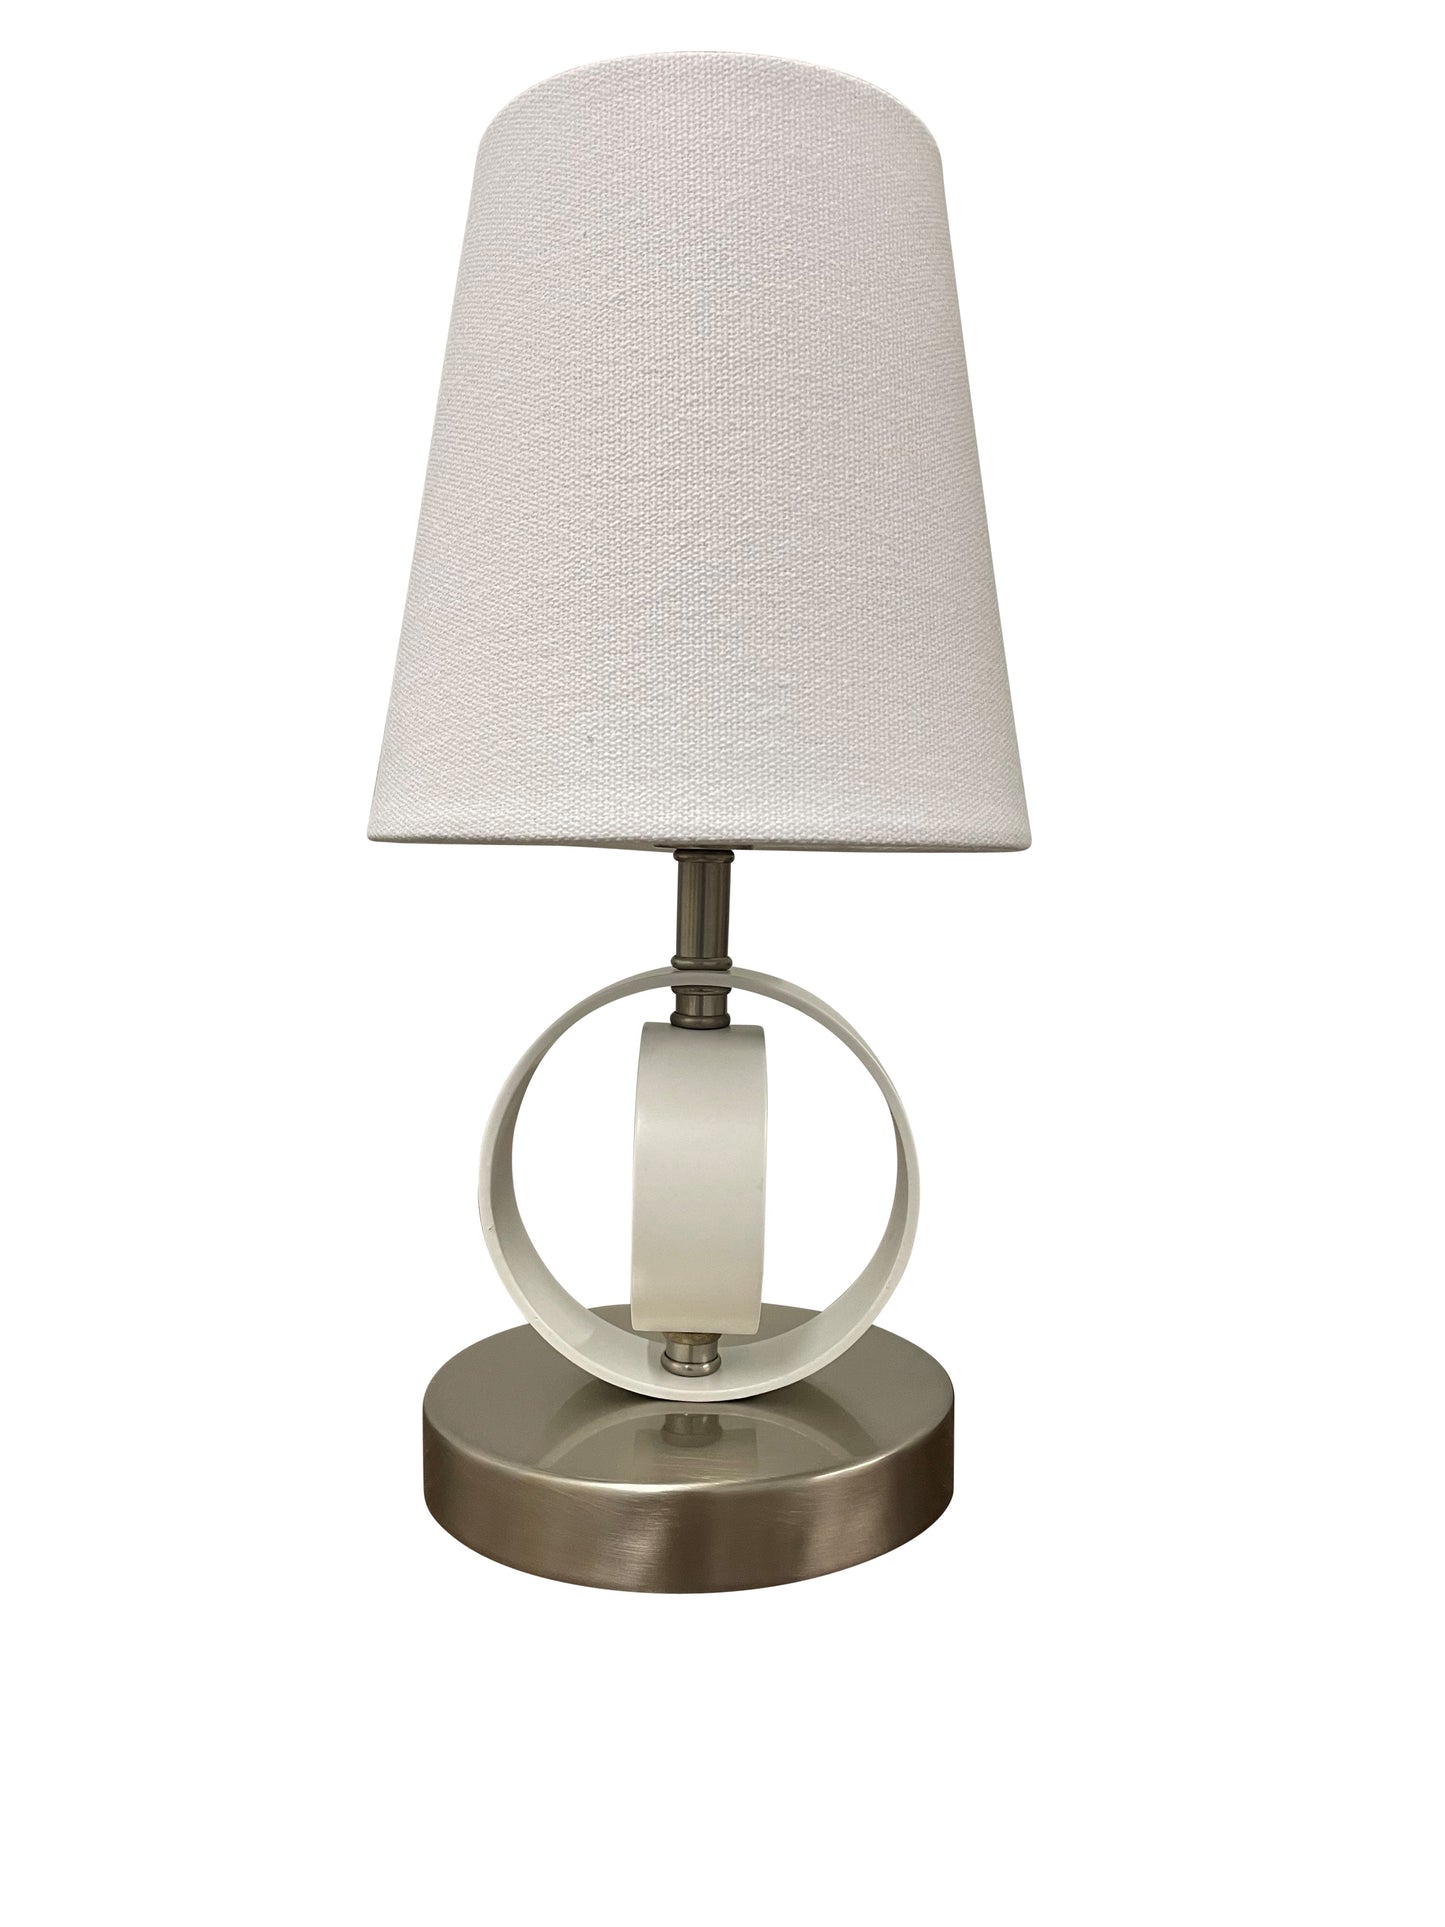 Bryson Mini 4" Double Ring Satin Nickel White Accent Lamp by House of Troy